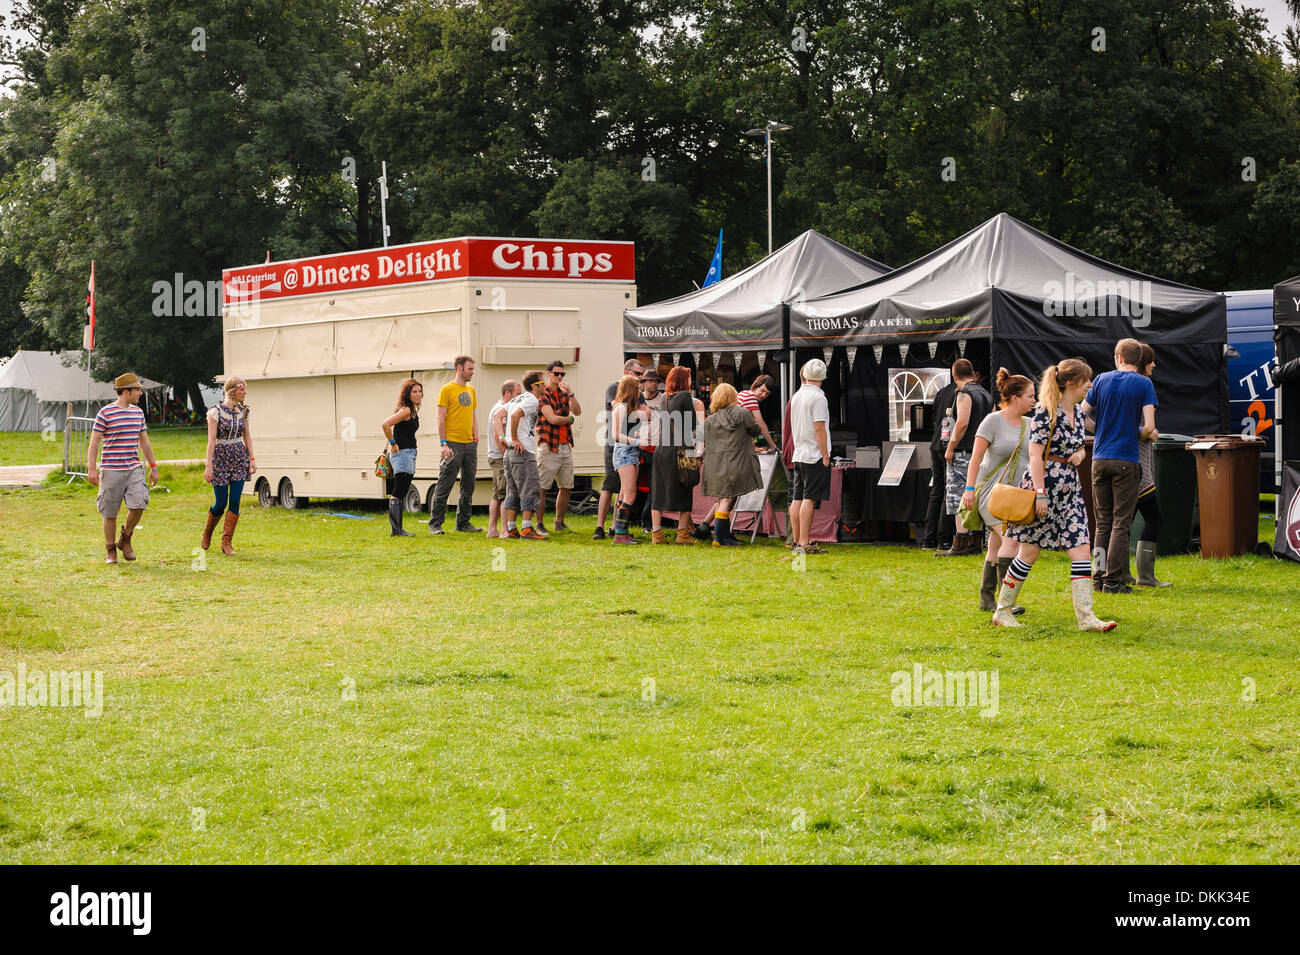 Queuing for breakfast and coffee in a field at a British music festival. Stock Photo